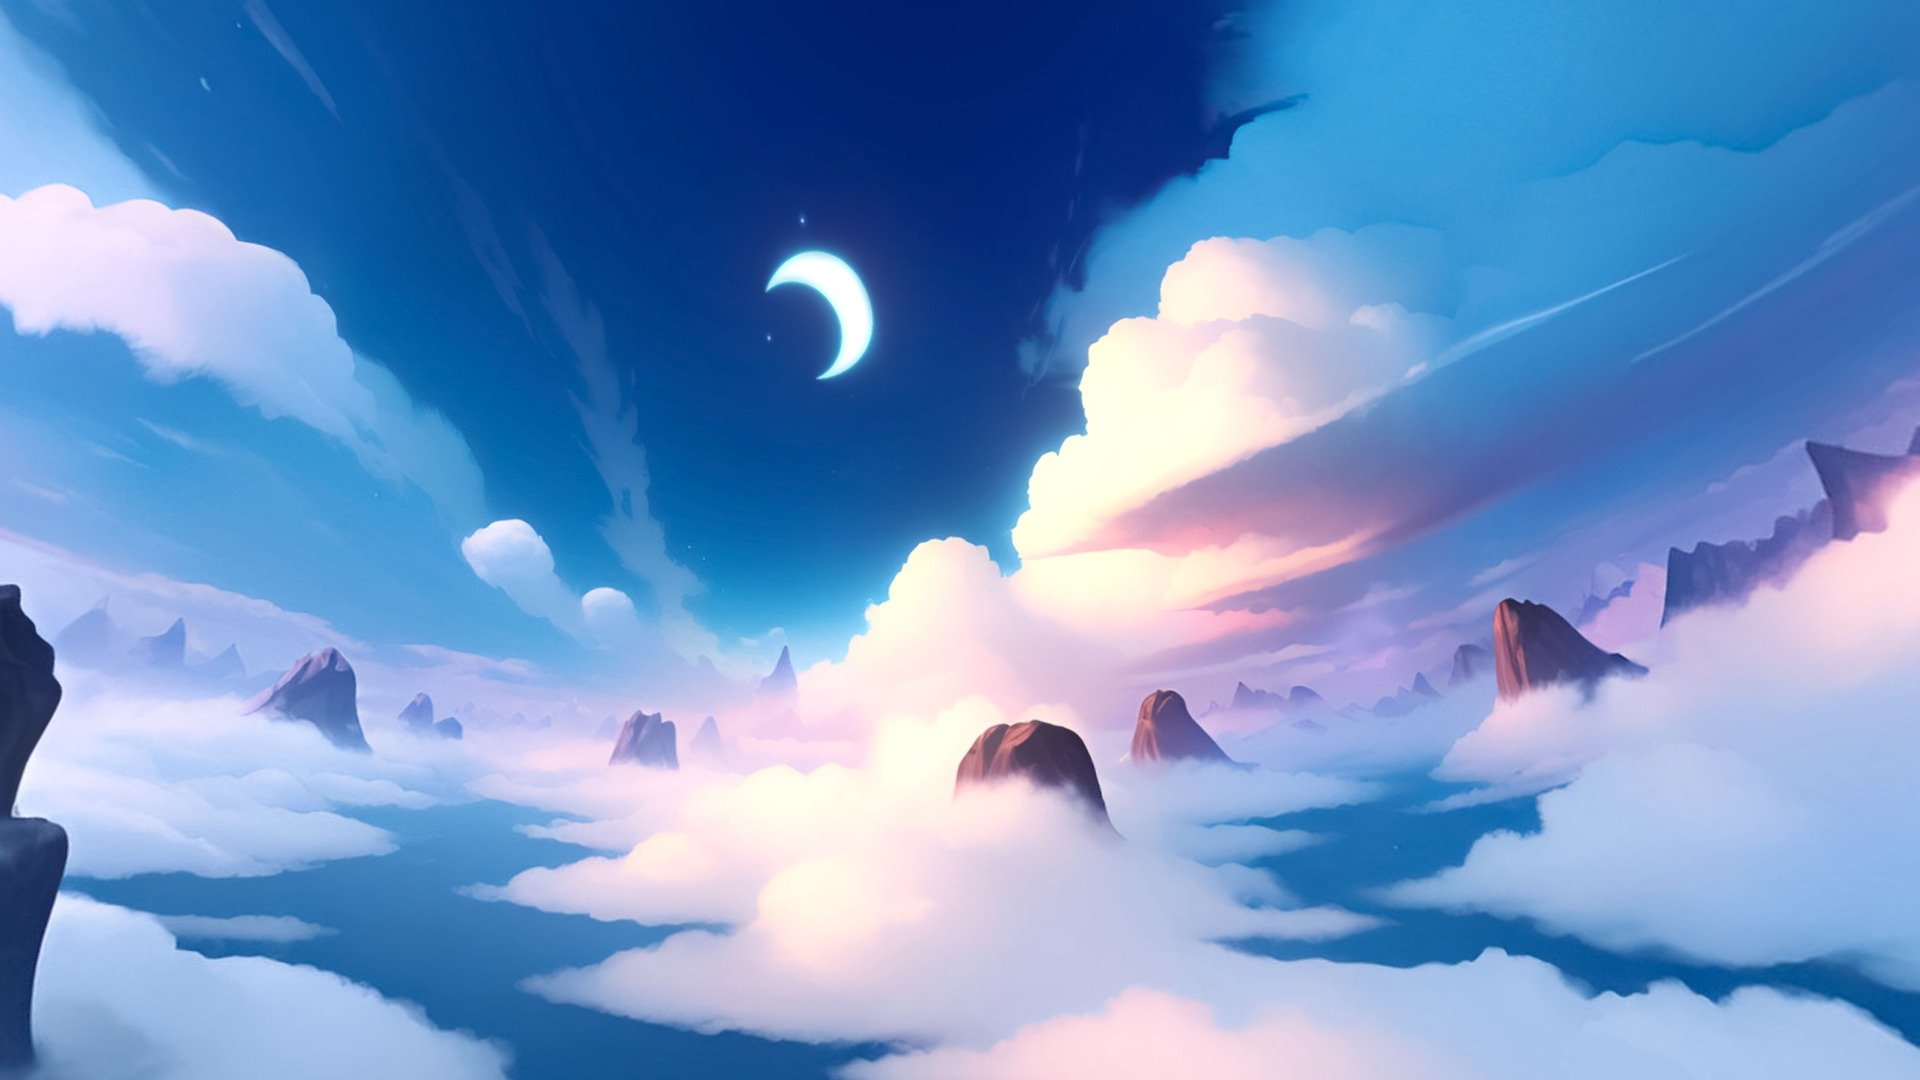 Beautiful stylized dreamy skybox. Perfect for beautiful, stylized environments and your rendering scene.

The package contains one panorama texture and one cubemap texture (png)

panorama texture: 6144 x 3072
cubemap texture: 6144 x 4608
The sizes can be changed in your graphics program as desired

( textures are under Other available downloads)

used: AI, Photoshop

*-------------Terms of Use--------------

Commercial use of the assets provided is permitted but cannot be included in an asset pack or sold at any sort of asset/resource marketplace or be shared for free* - SkyBox - Buy Royalty Free 3D model by stylized skybox (@skybox_) 3d model